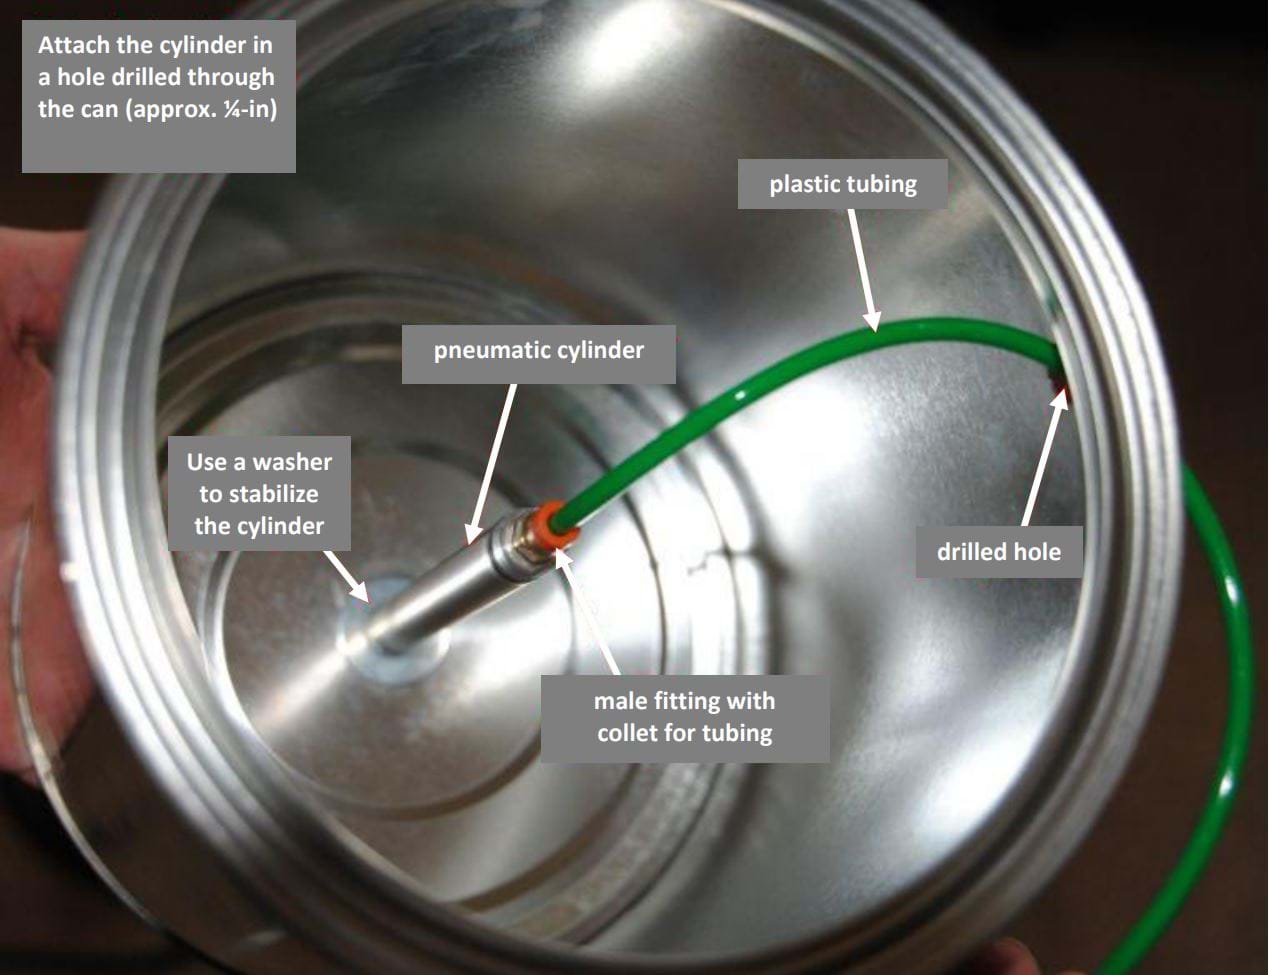 Photo shows inside a paint can with many labeled parts: washer to stabilize cylinder, pneumatic cylinder, male fitting with collet for tubing, plastic tubing, drilled hole in side of can. Note: Hole drilled through can where cylinder attaches (approx. ¼-inch).